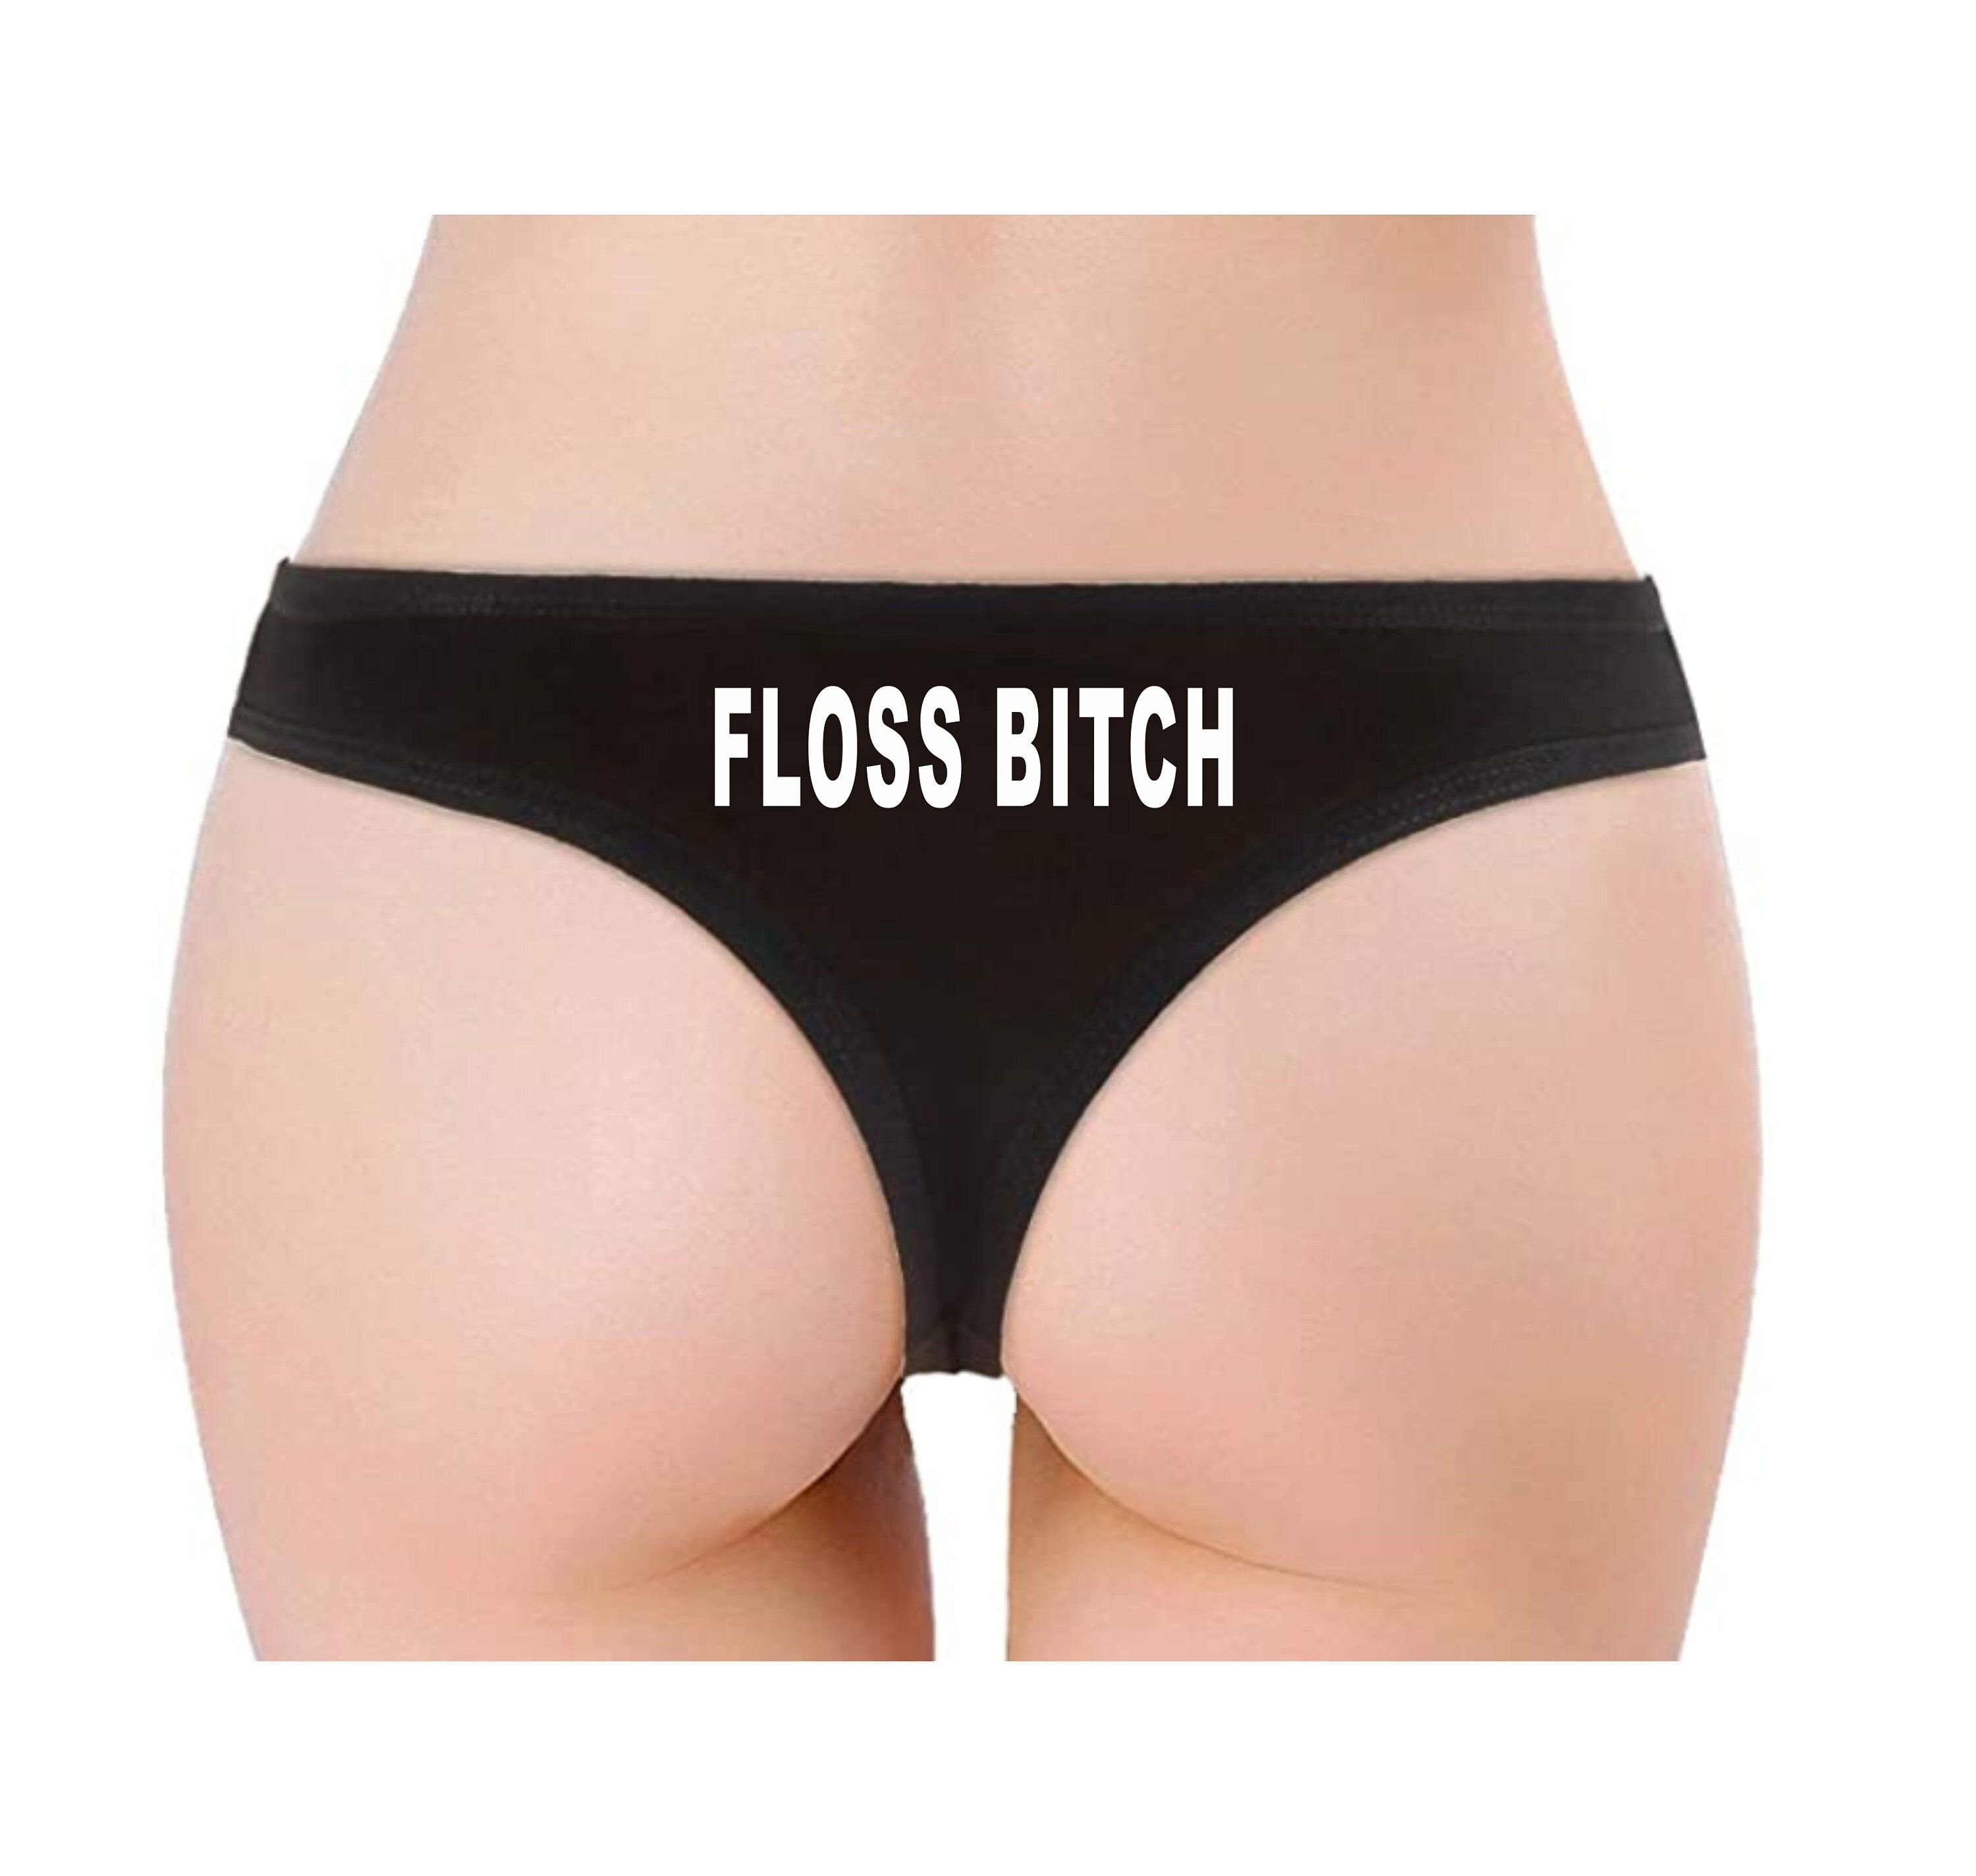 FLOSS BITCH THONG Funny Panties Whale Tail Words on Etsy